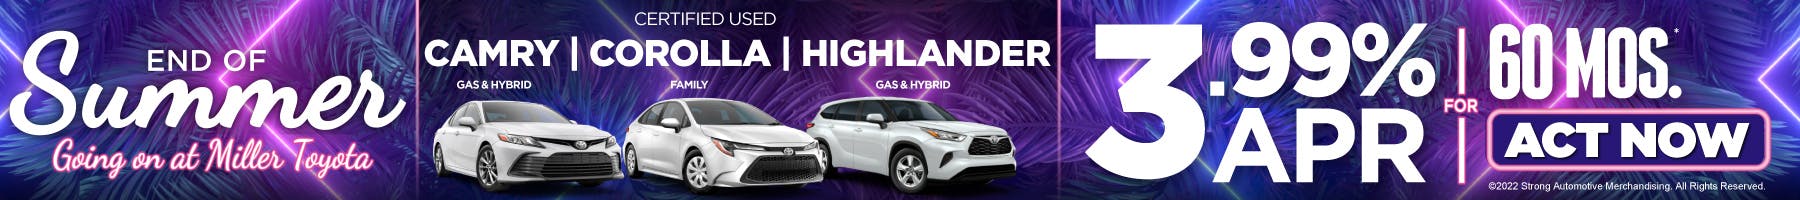 August – Certified Used Camry, Corolla, Highlander | Miller Toyota